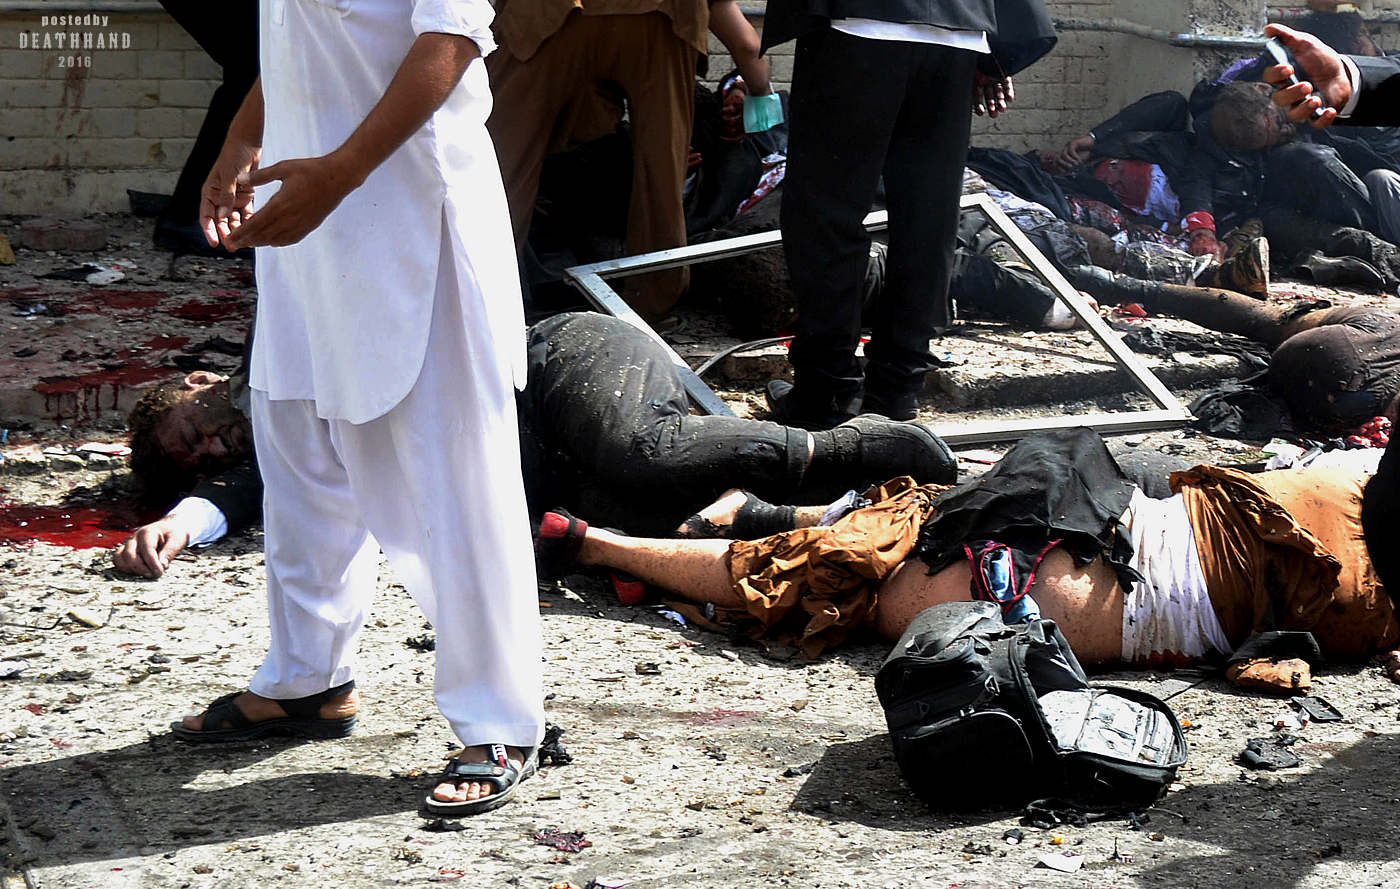 lawyer-killed-mourners-at-hospital-hit-by-suicide-bomber-8-Quetta-PK-aug-8-16.jpg